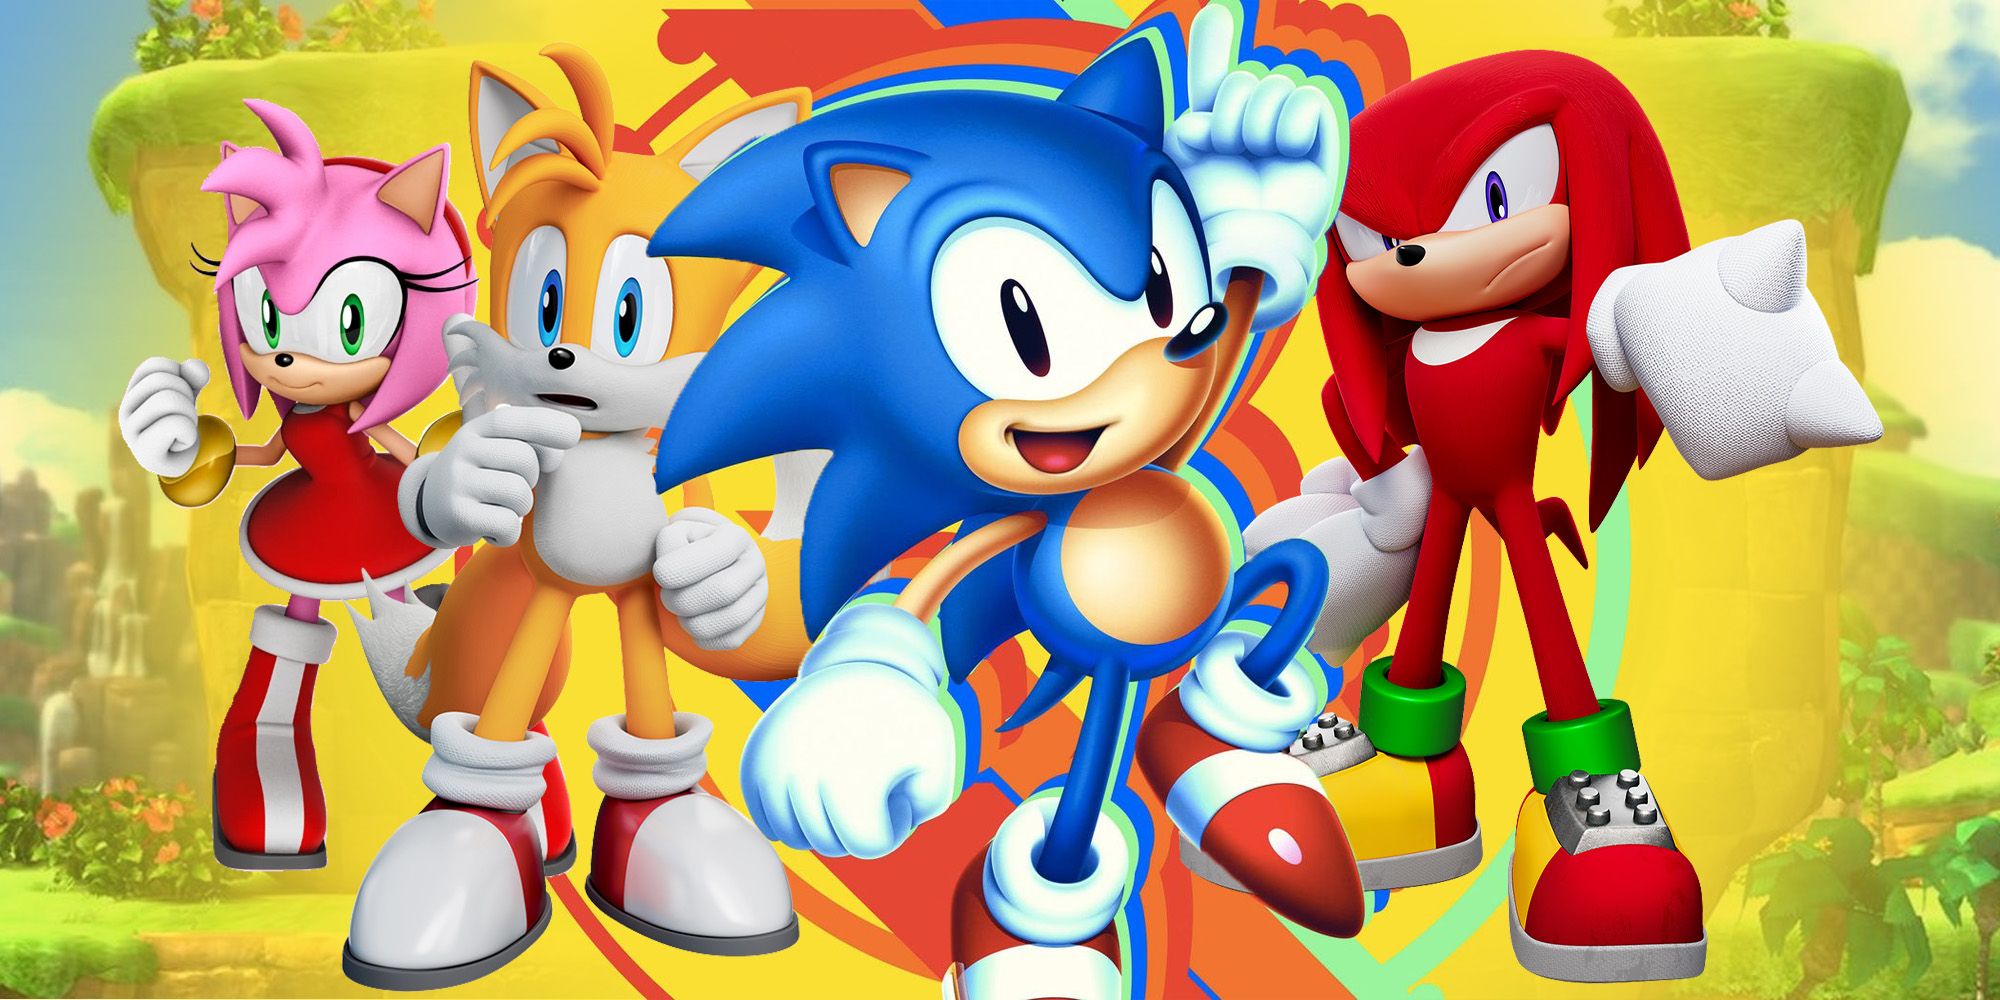 sonic the mania game